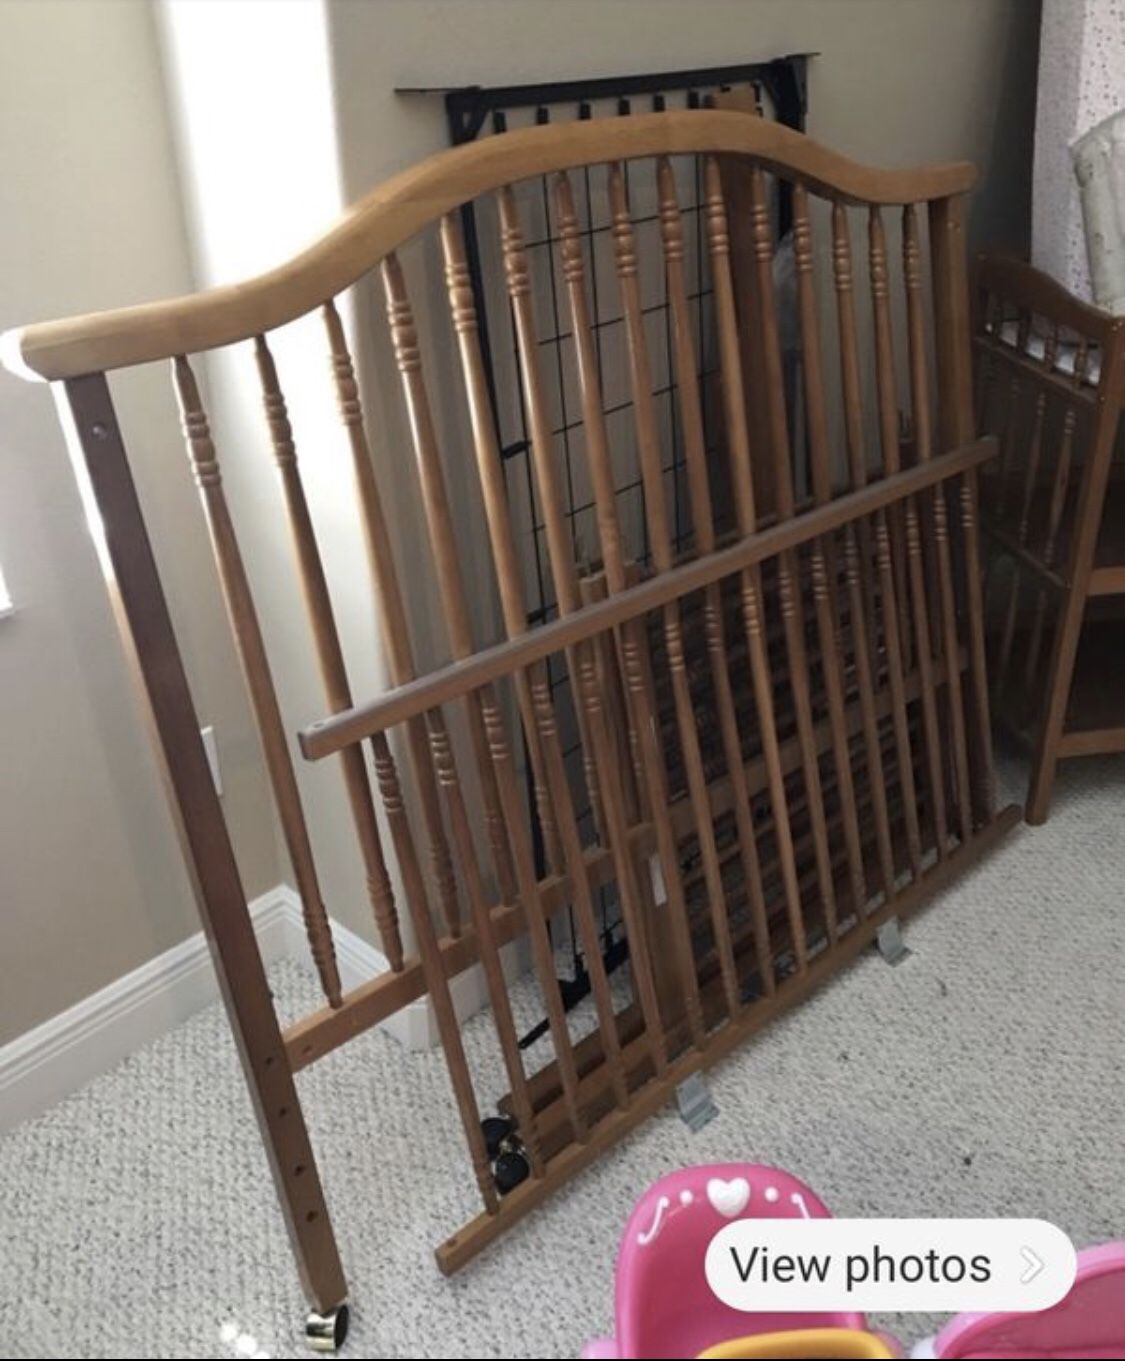 Free - Solid wood crib and changing table